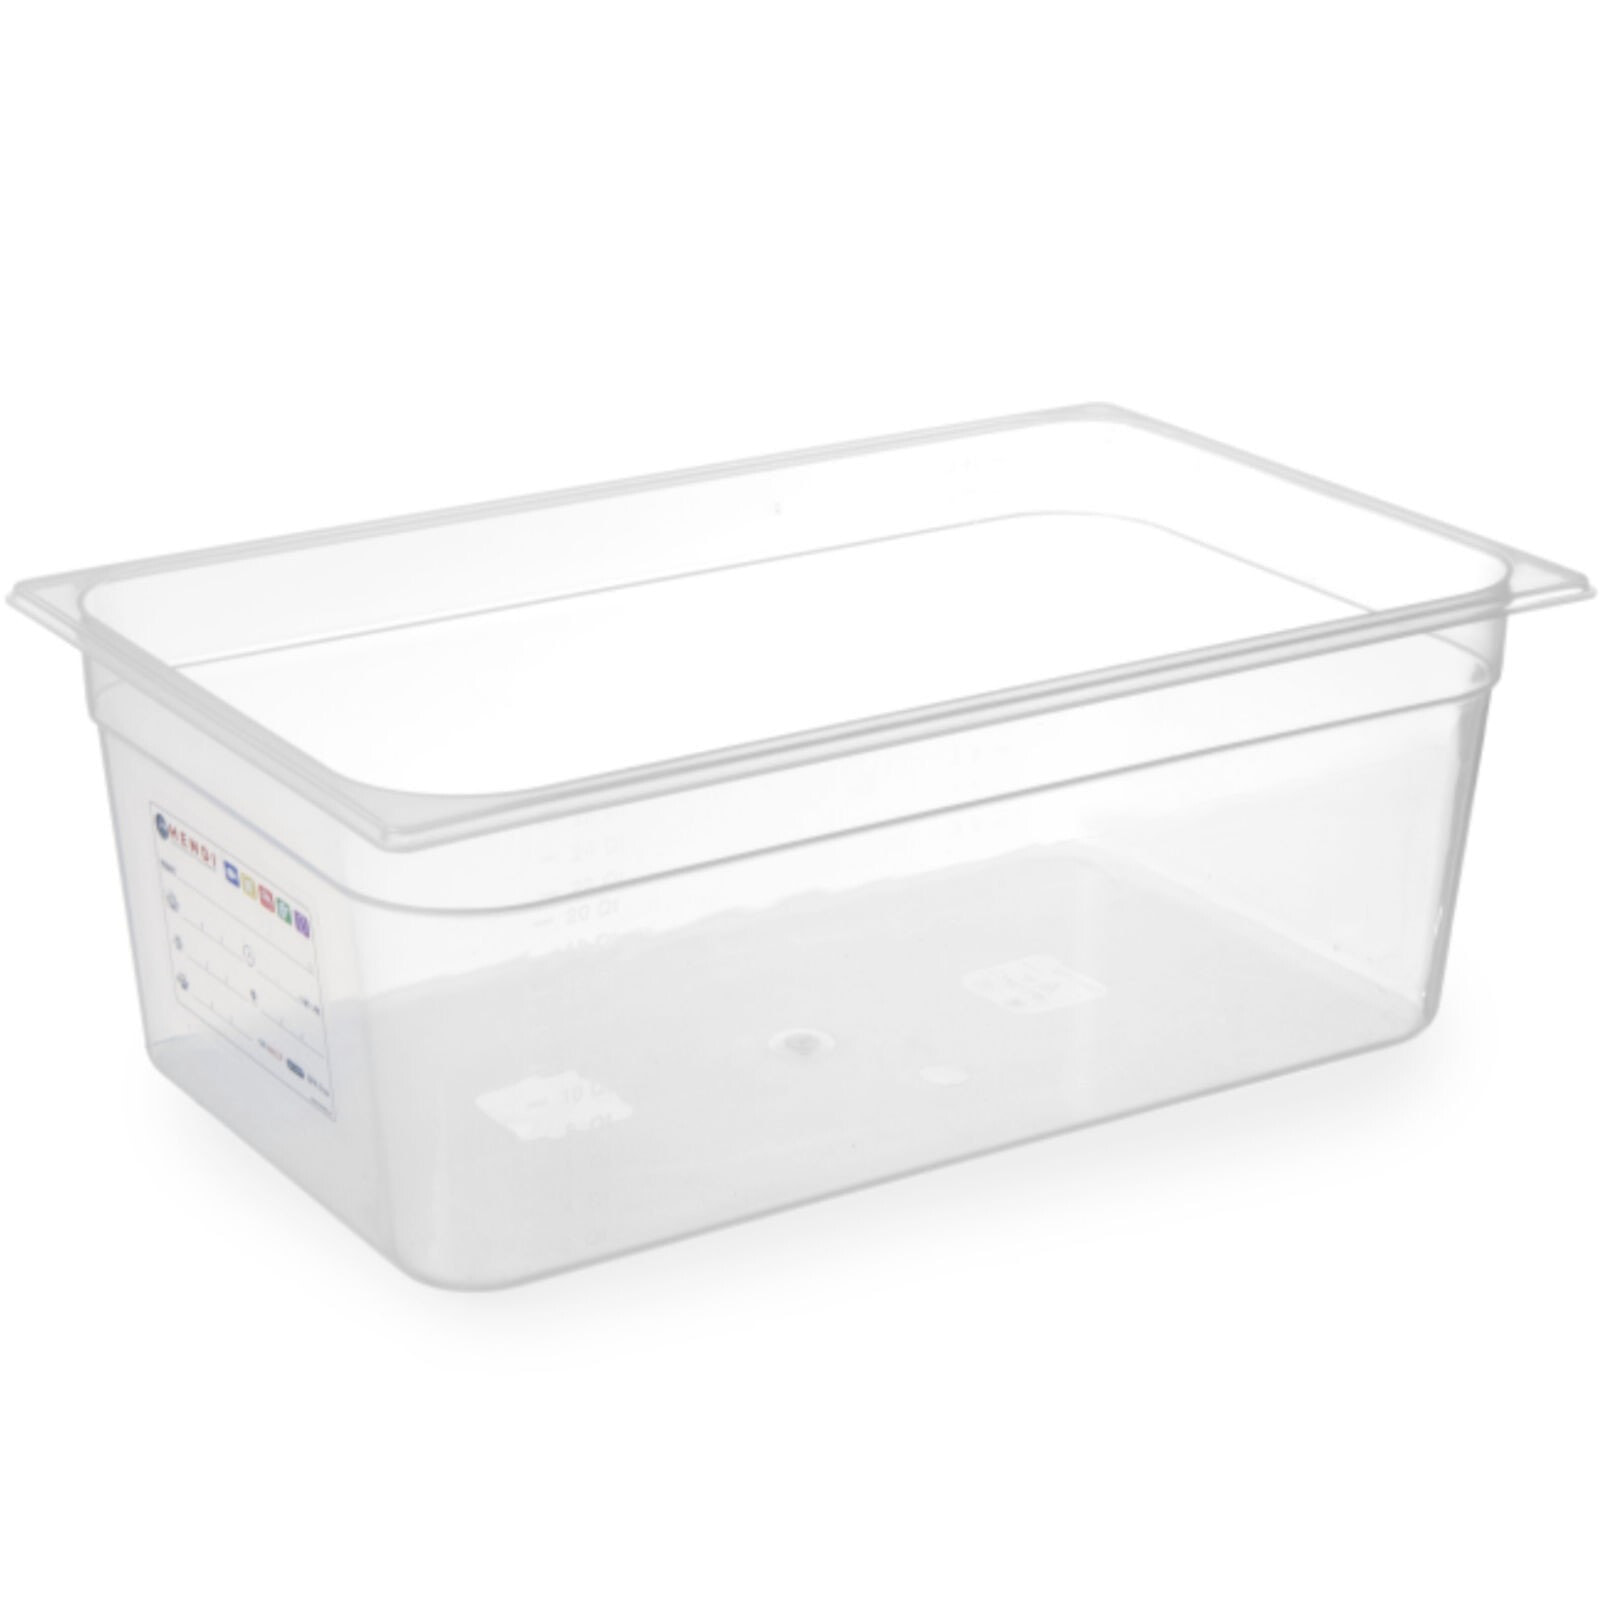 HACCP GN 1/1 polypropylene container, height 65 mm - Hendi 880036